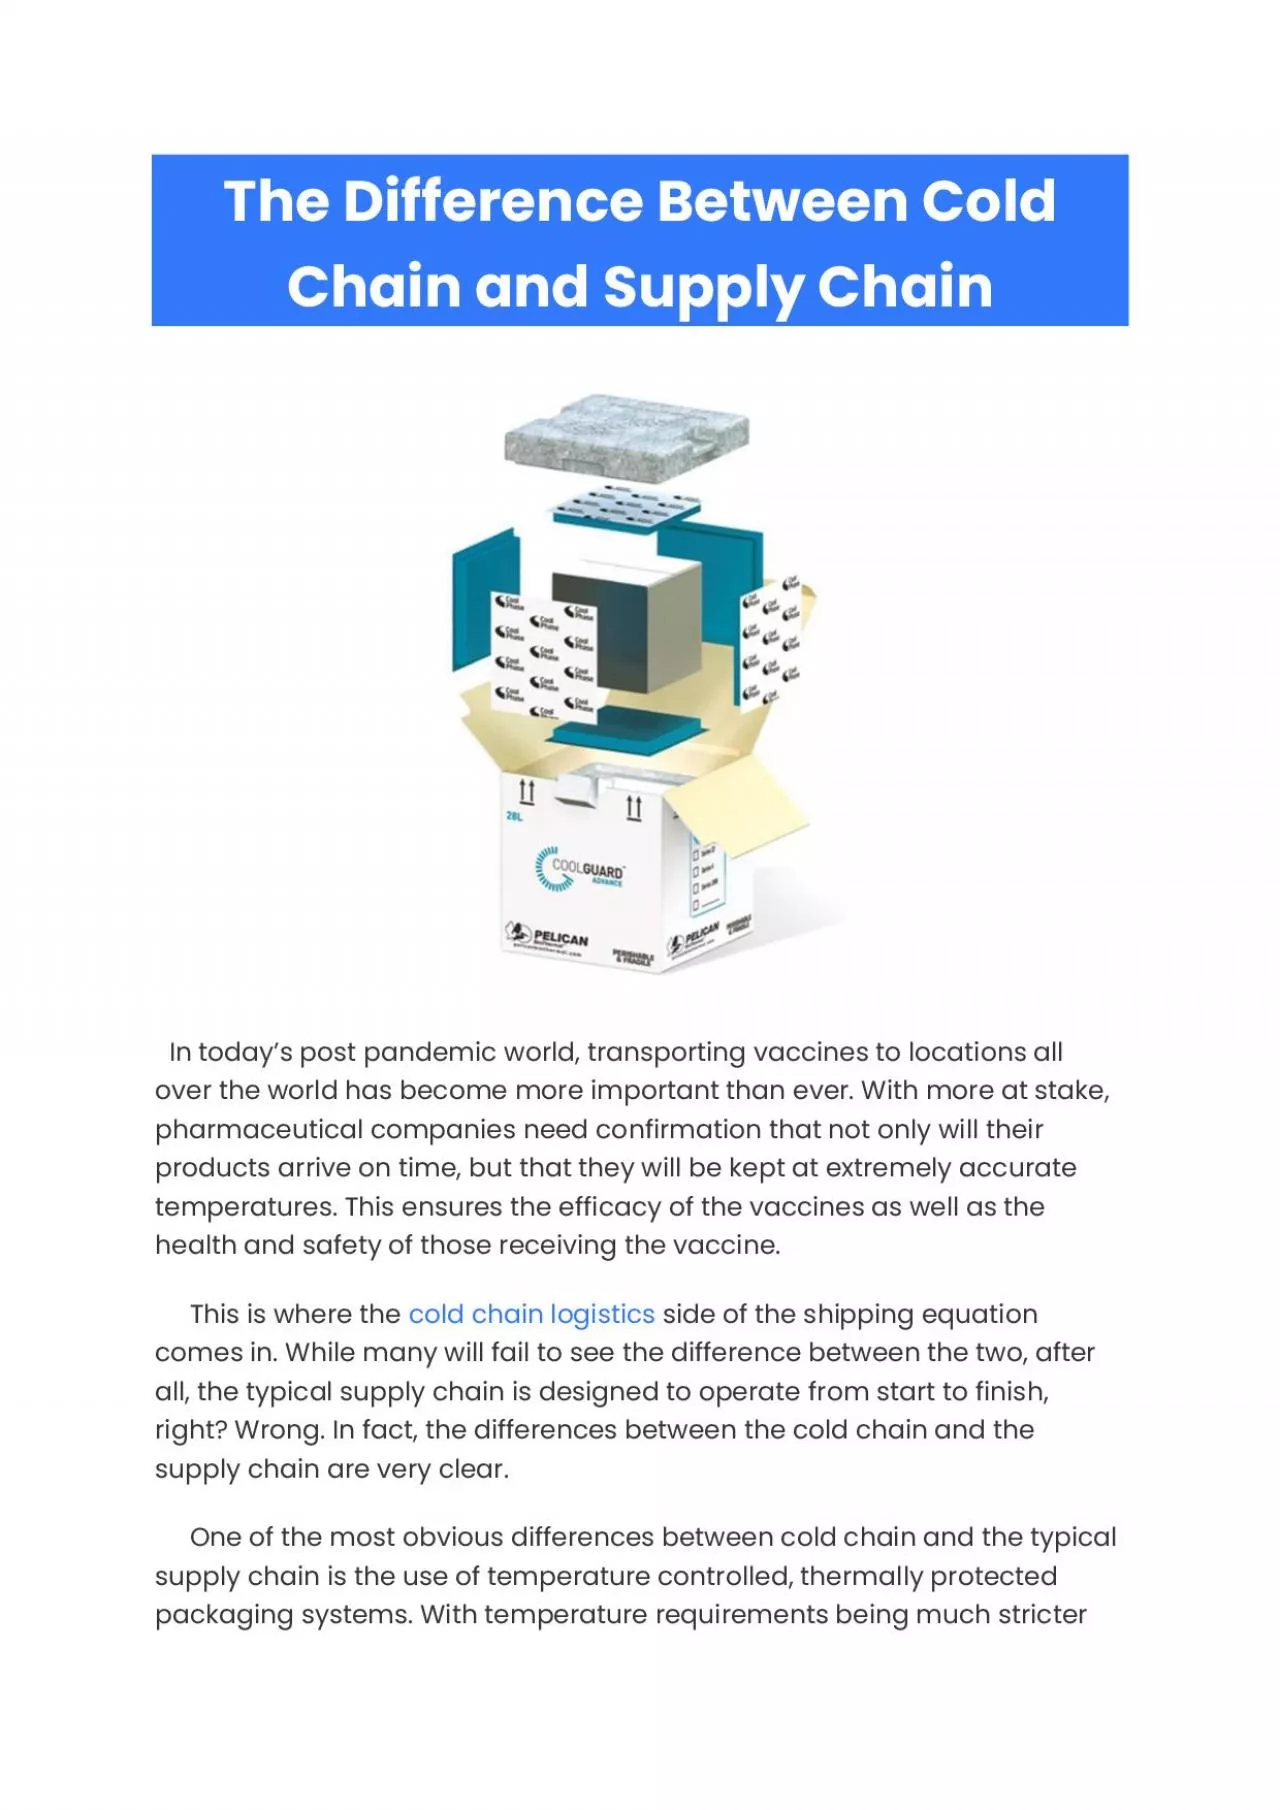 The Difference Between Cold Chain and Supply Chain